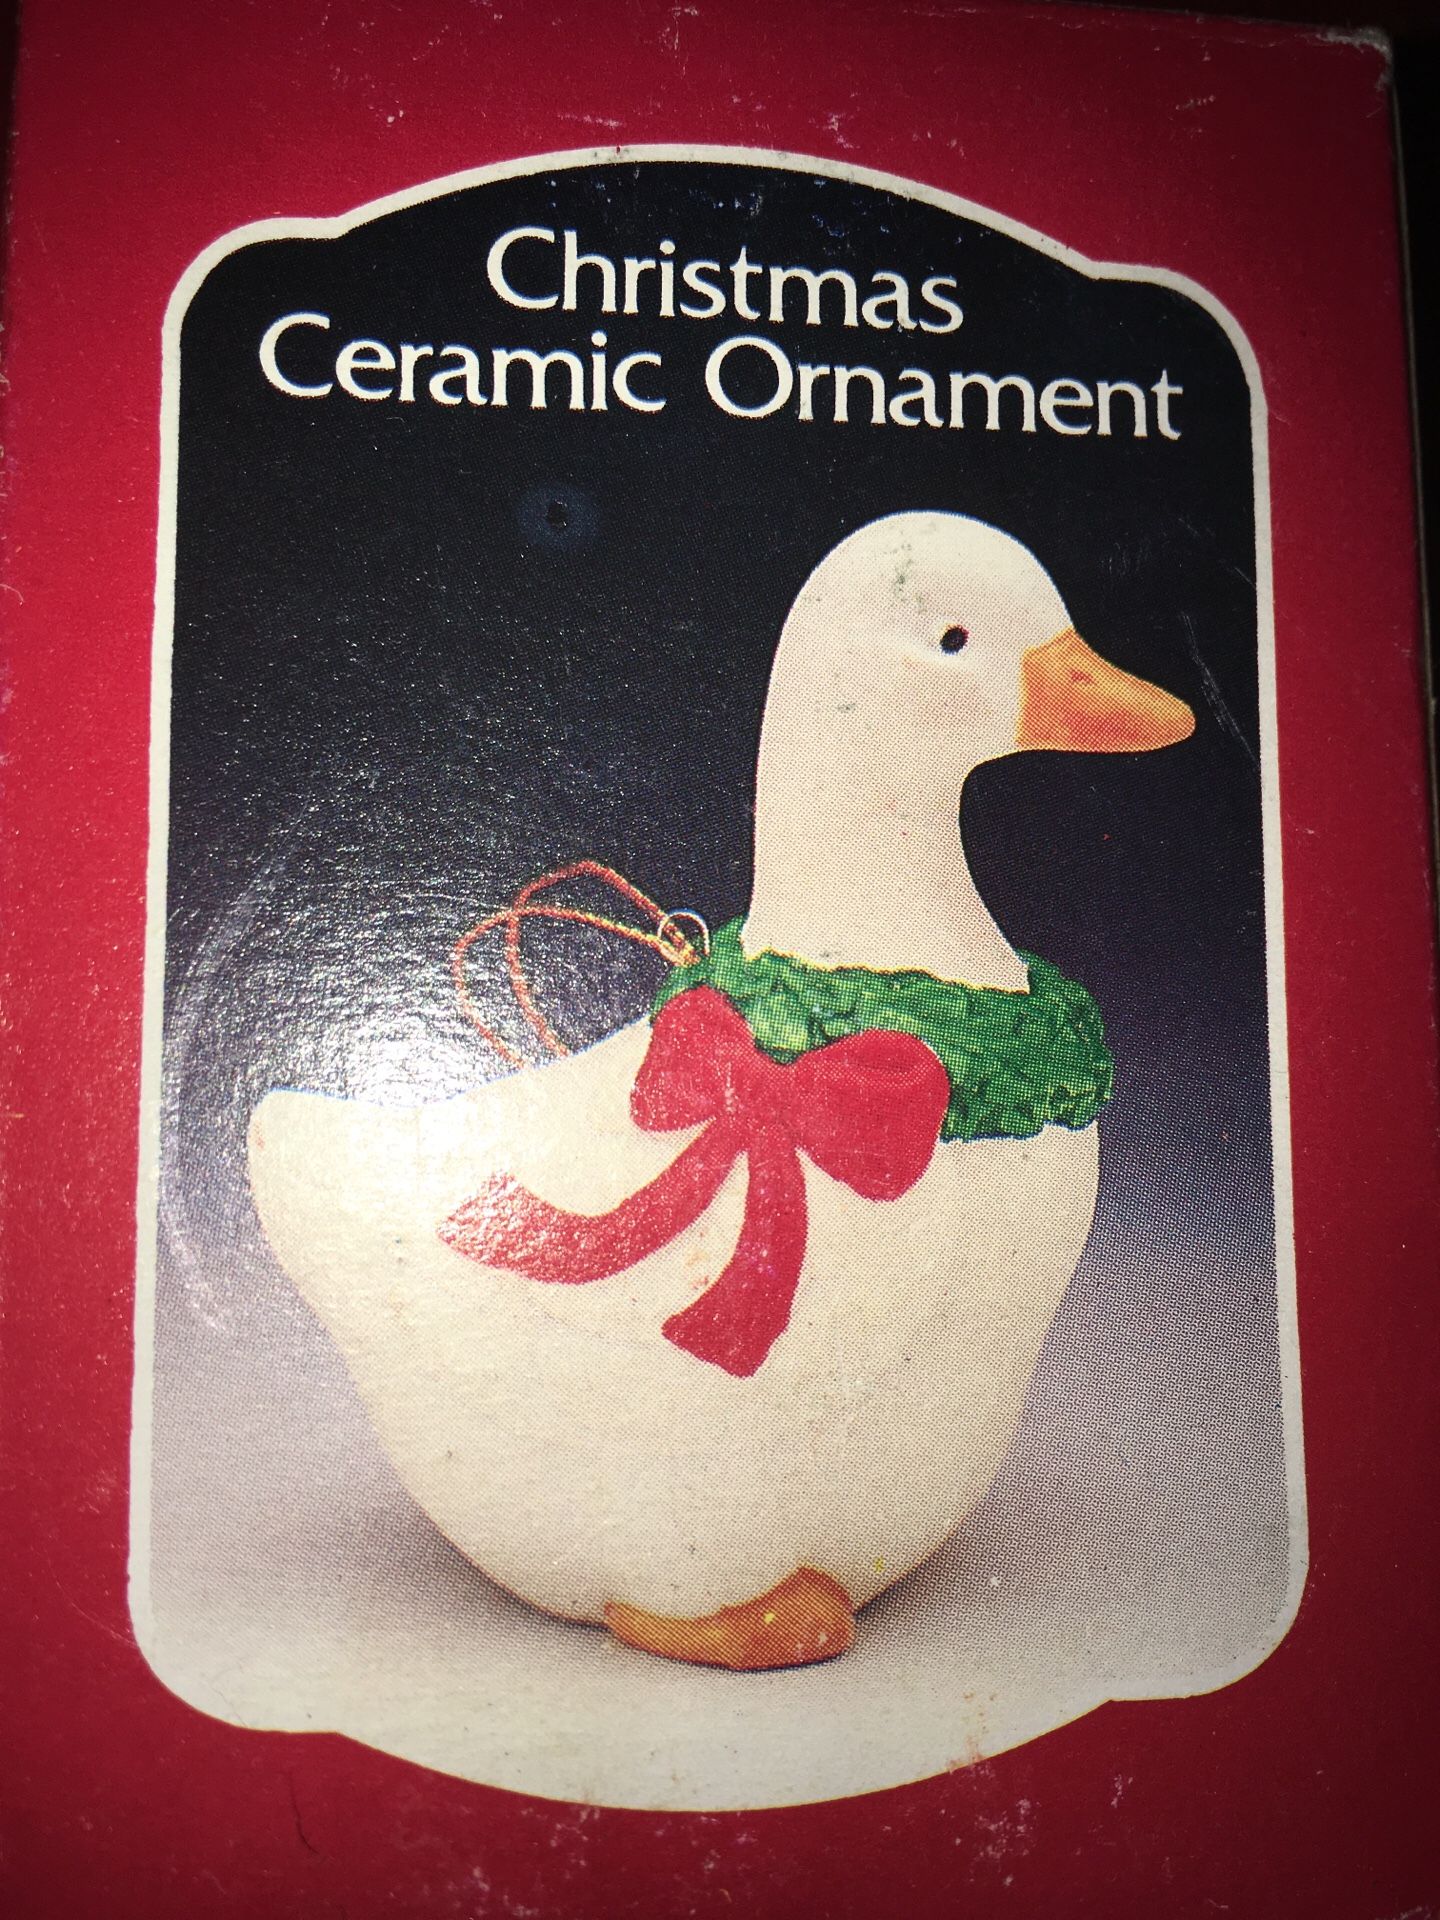 New in box vintage Christmas ceramic ornaments